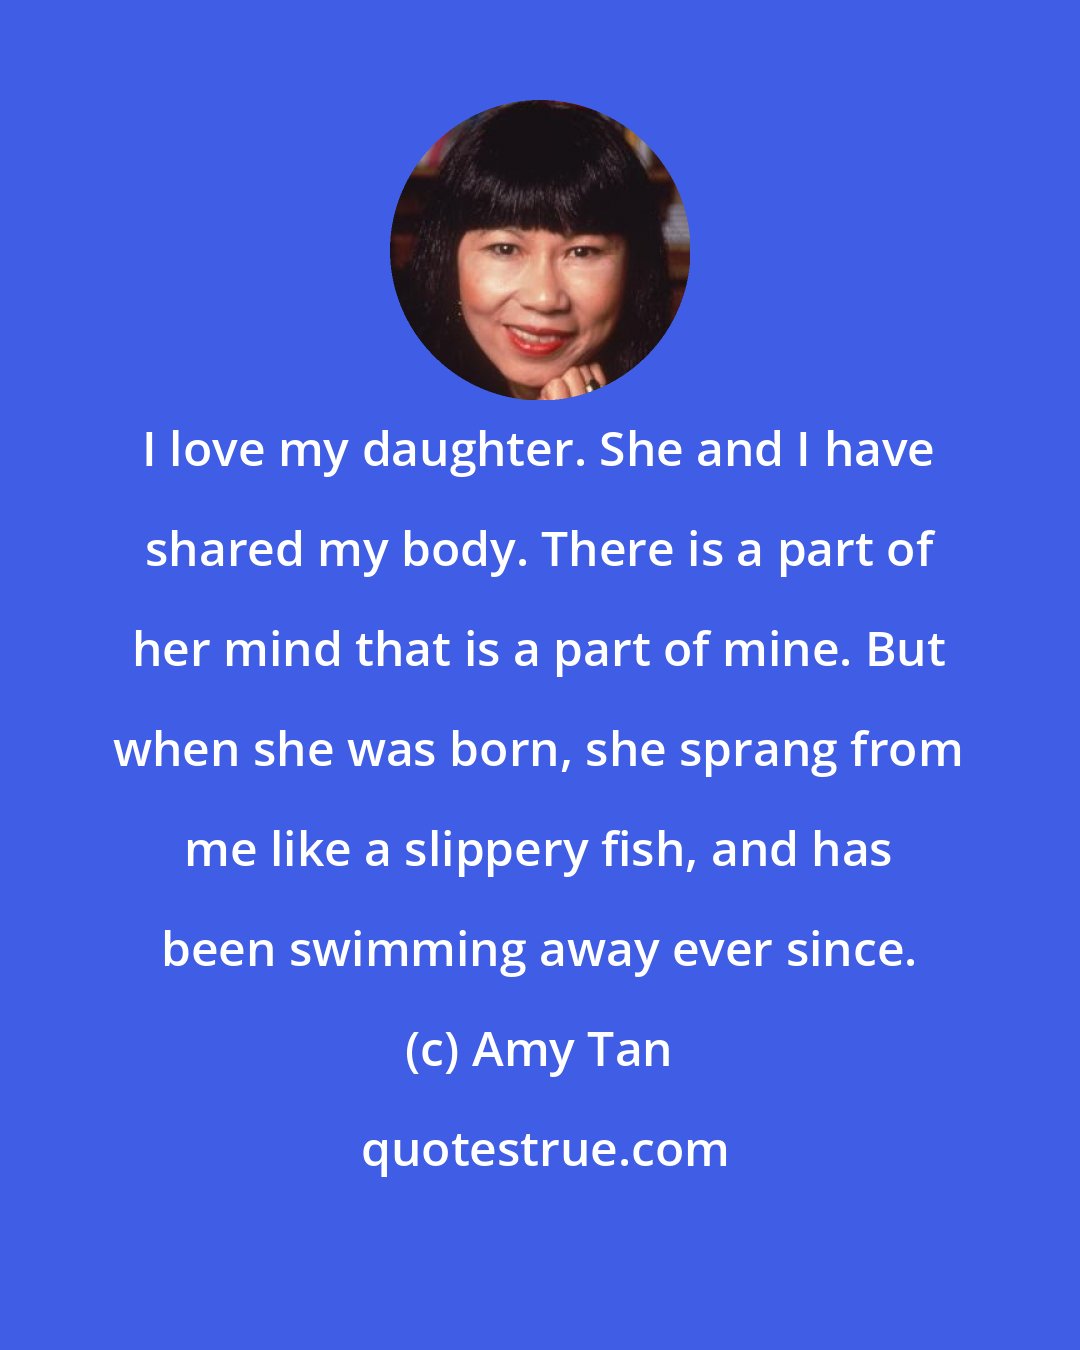 Amy Tan: I love my daughter. She and I have shared my body. There is a part of her mind that is a part of mine. But when she was born, she sprang from me like a slippery fish, and has been swimming away ever since.